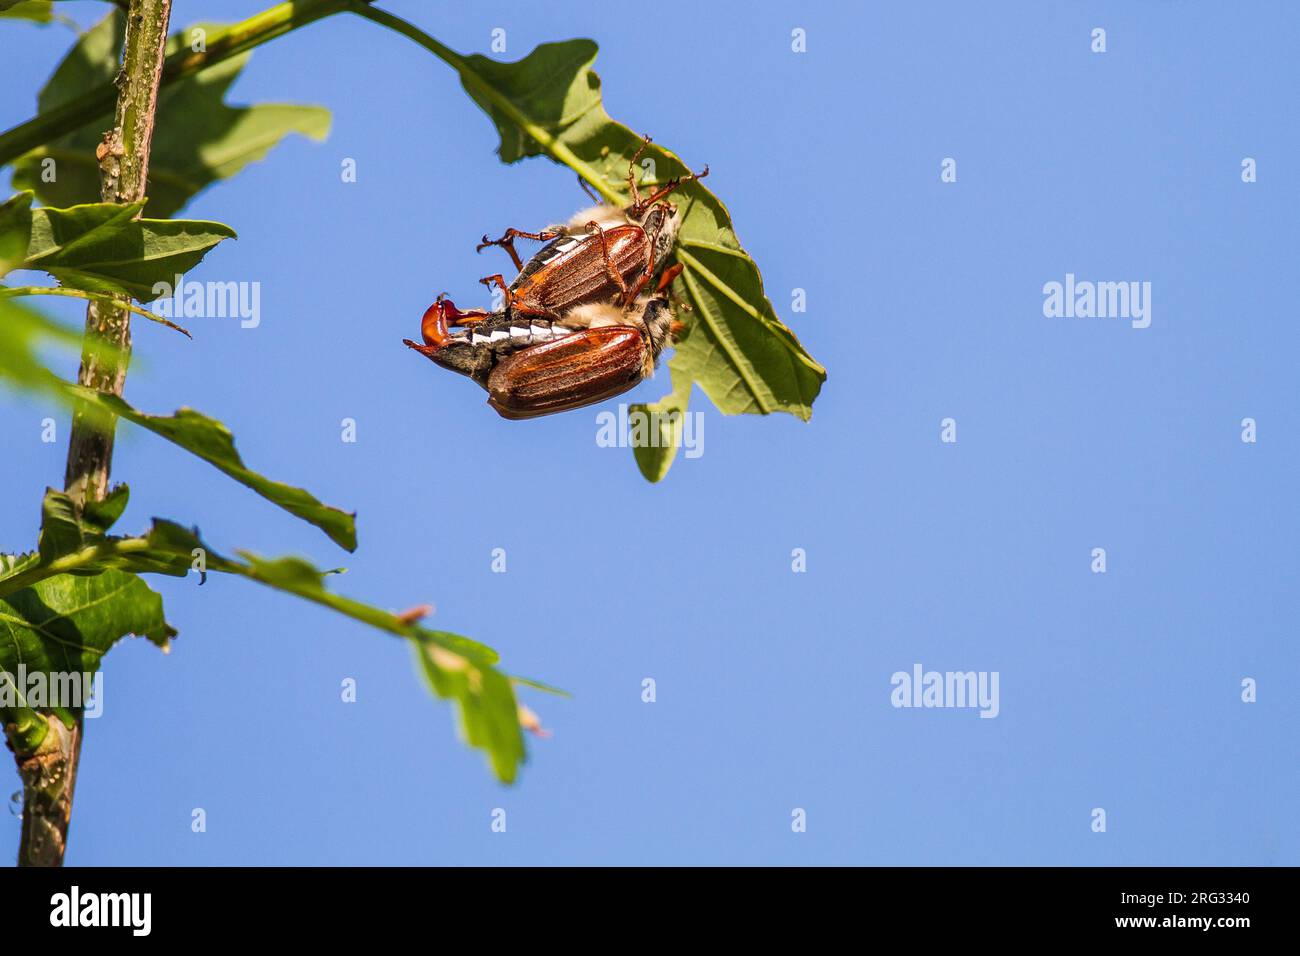 Meikever, Cockchafer, Melolontha melolontha copulation and males looking for partner on oak tree Stock Photo